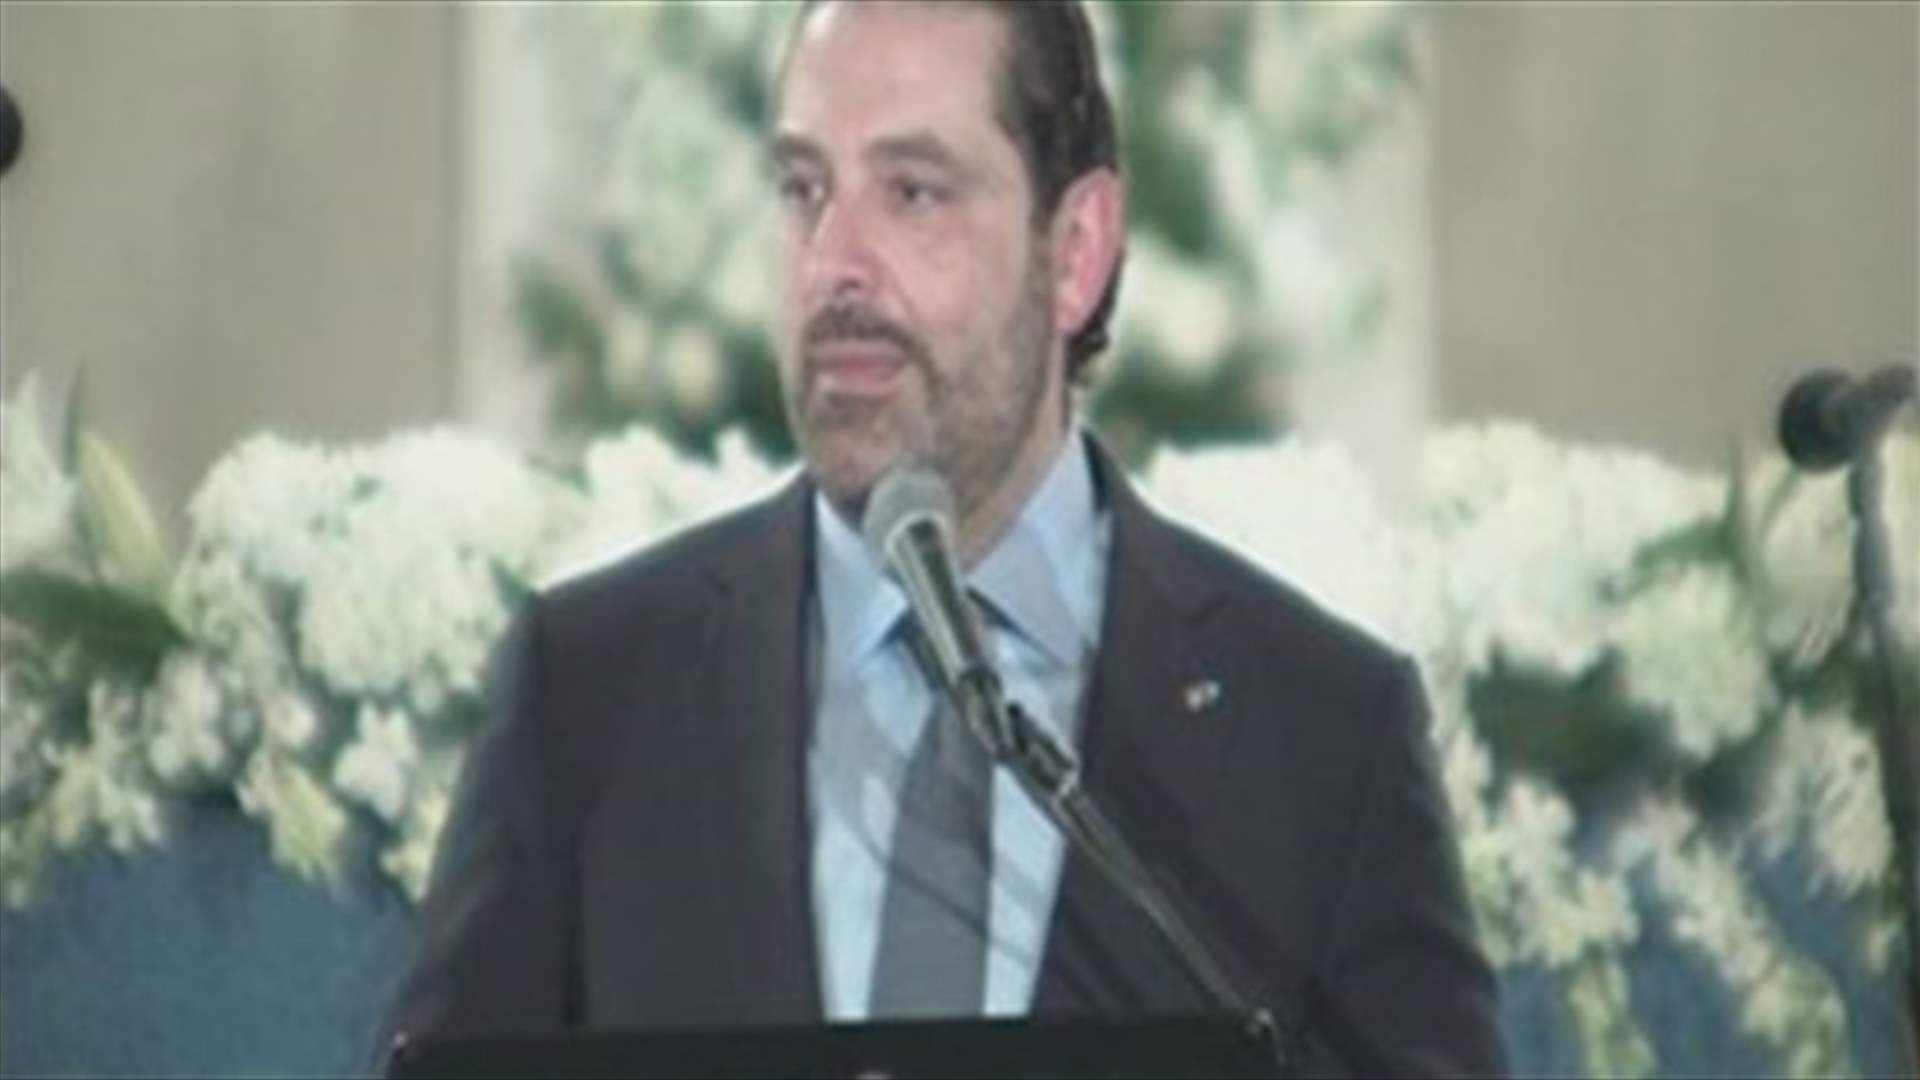 PM Hariri: We are determined to avoid any schism